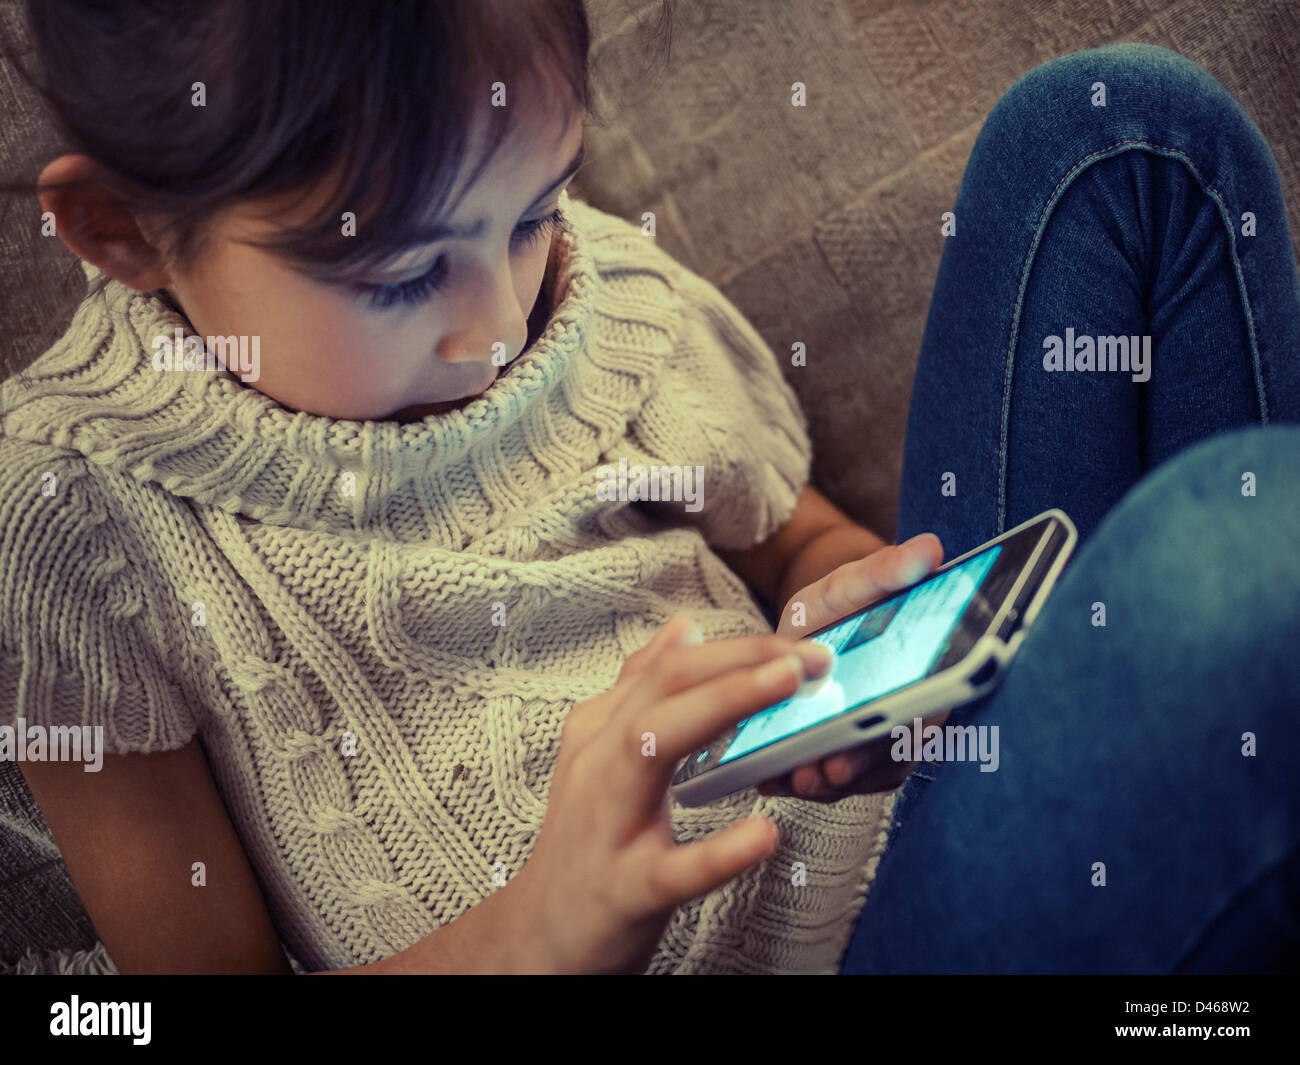 Girl using smartphone Banque D'Images